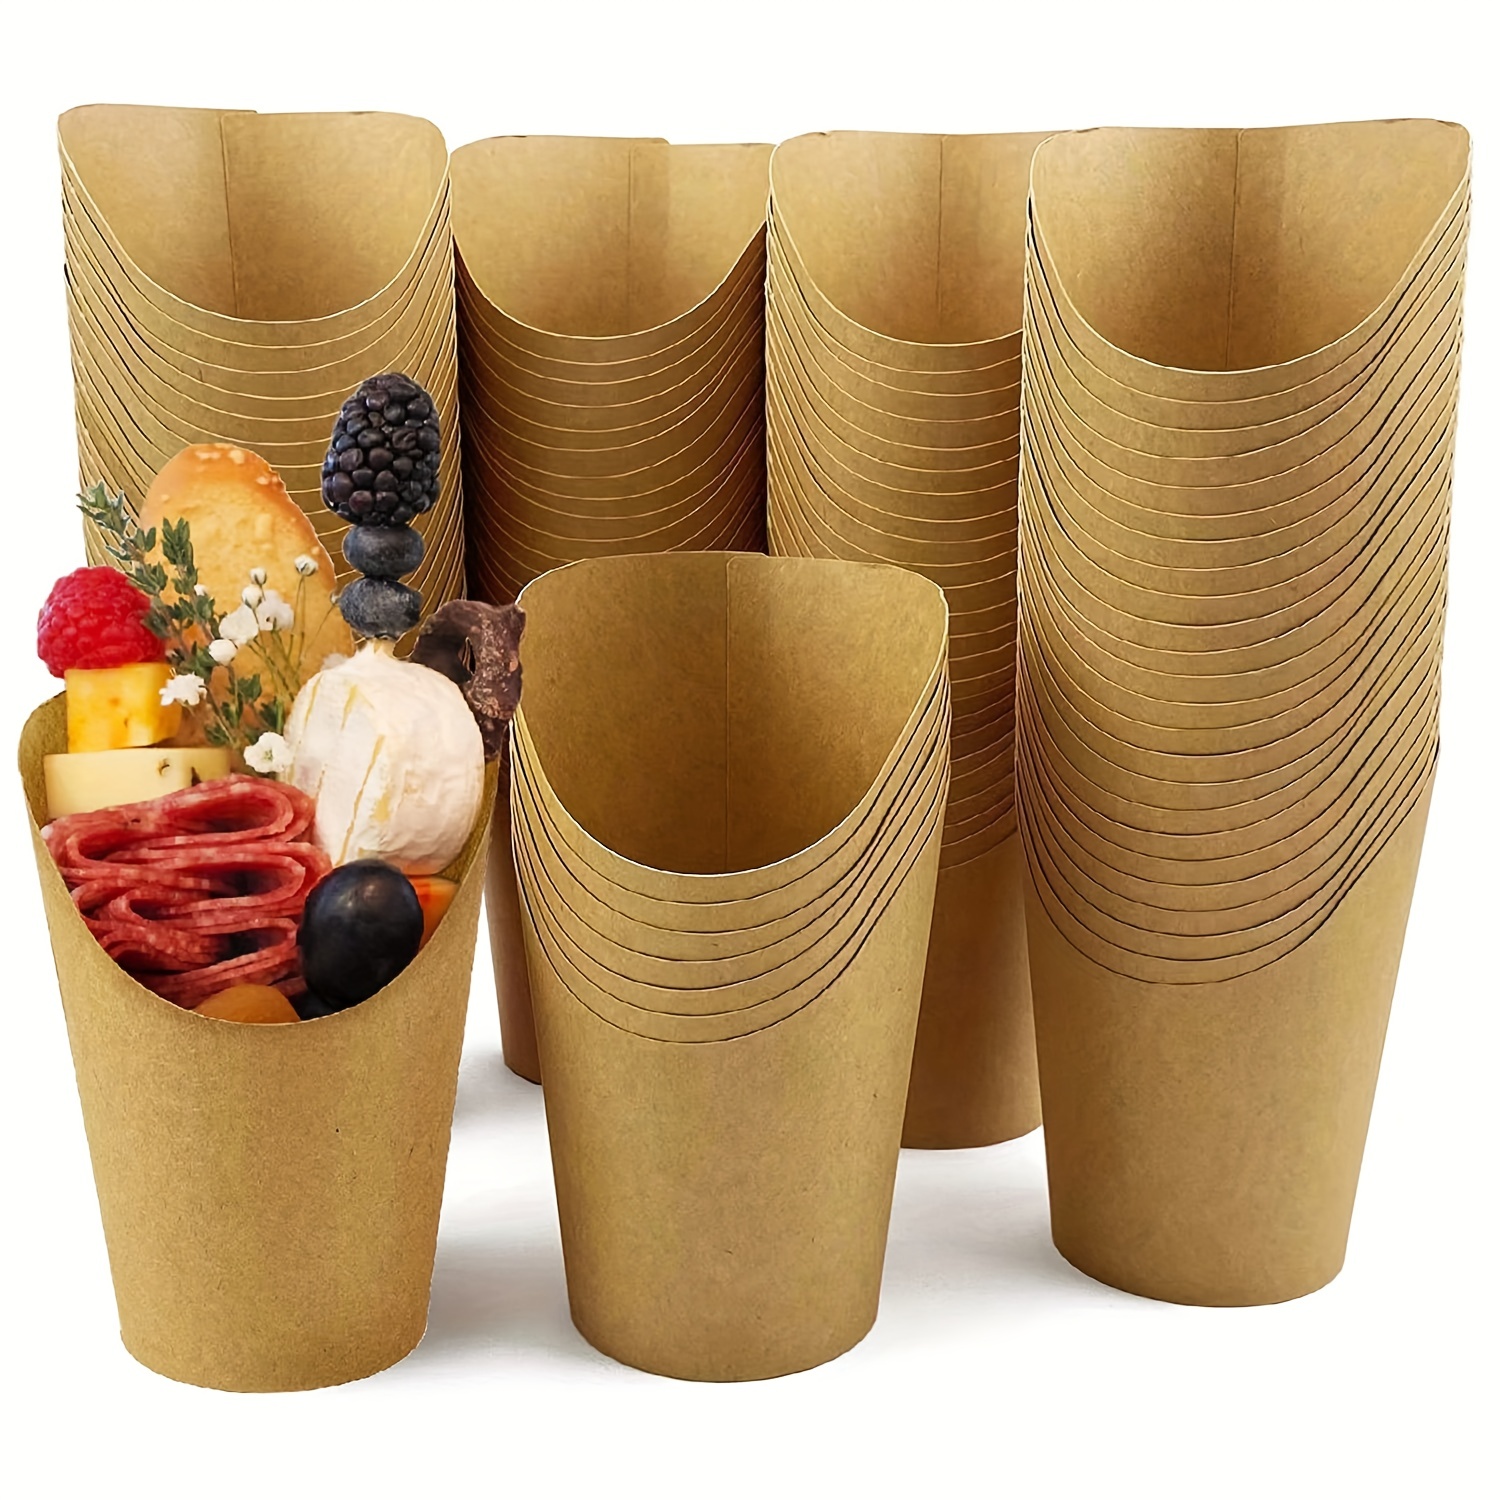 

50pcs Disposable Paper Cup Set - Perfect For French Fries, Cupcakes, Charcuterie & More! Eid Al-adha Mubarak